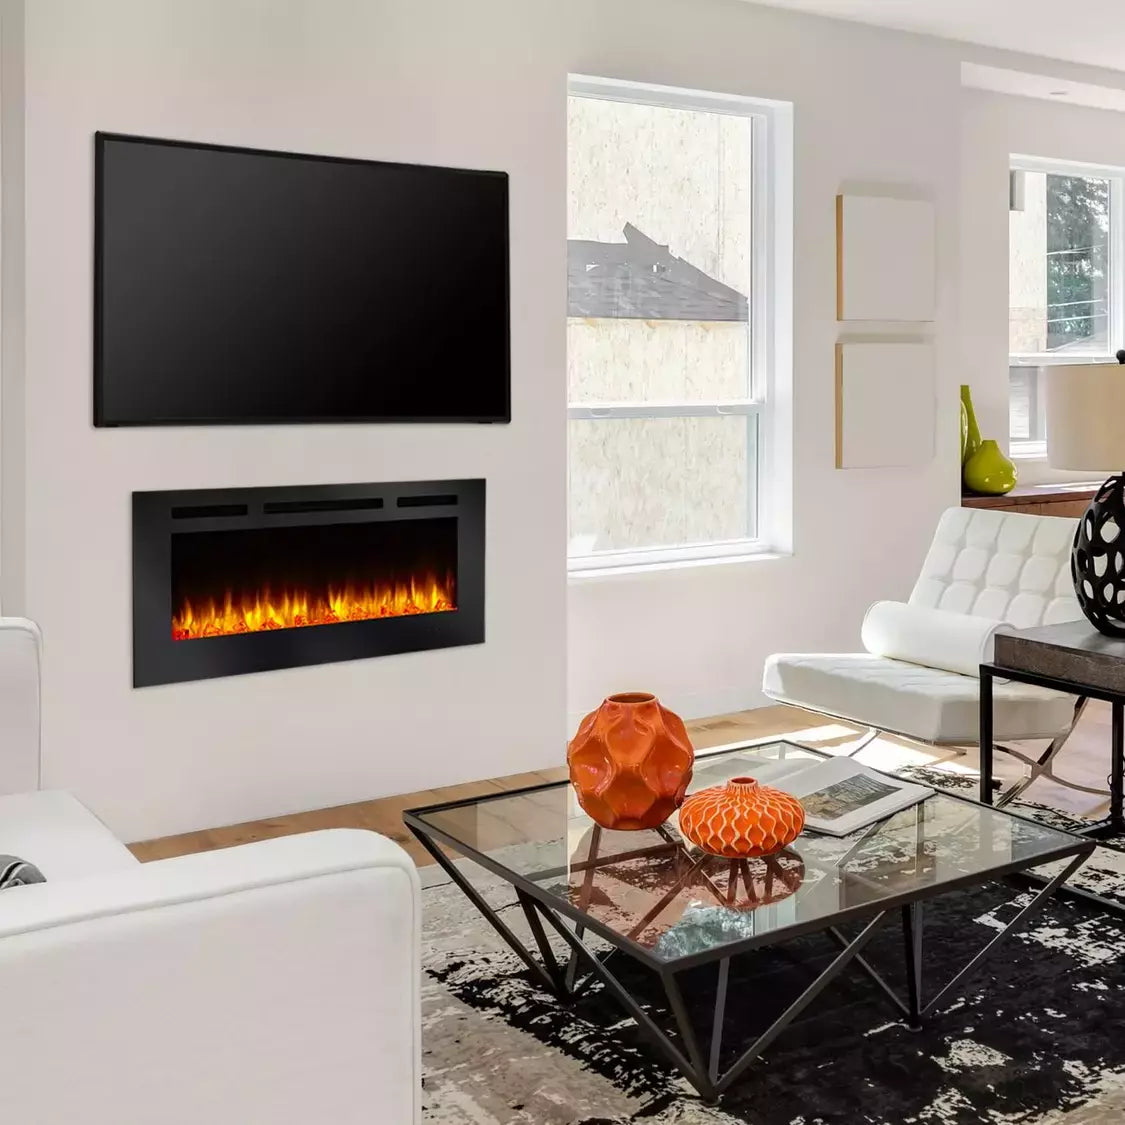 SimpliFire Allusion Linear Electric Fireplace - 40"